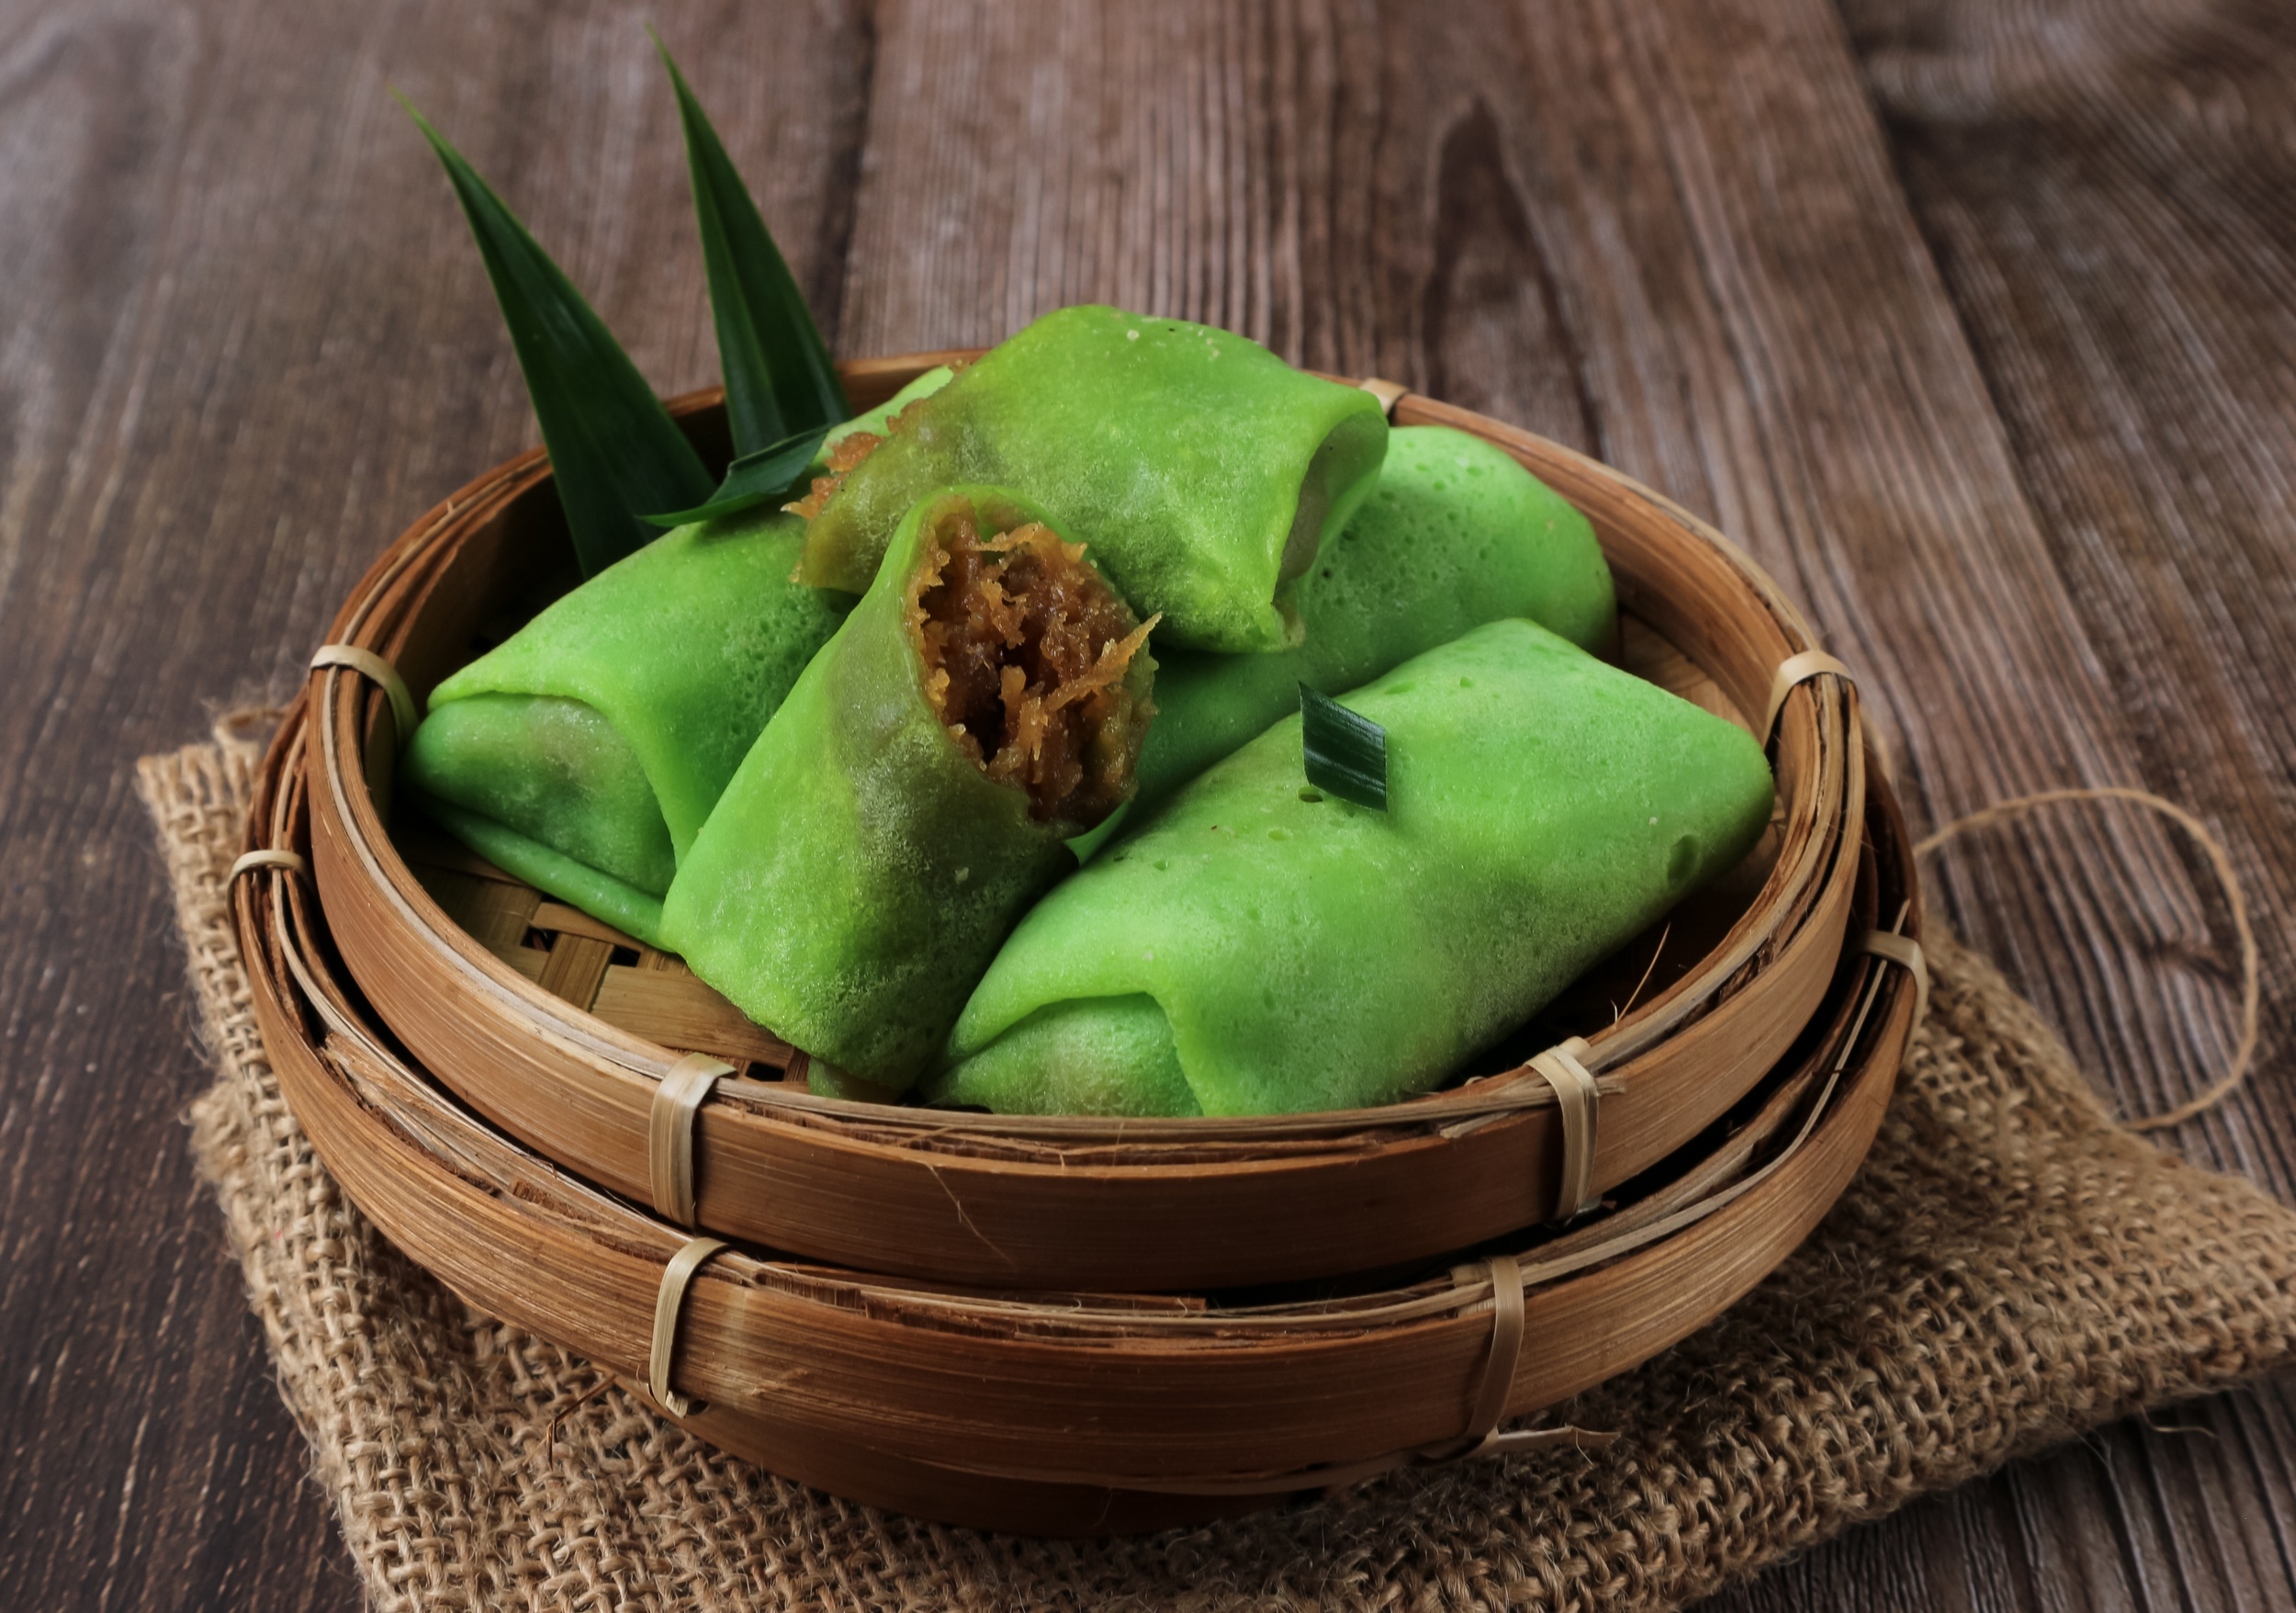 <p><em>Dadar gulung</em> (which translates to “rolled pancake”) is a popular Indonesian snack that resembles a blintz — except it’s bright green! Pandan paste provides the hue, and the filling consists of palm sugar and coconut. If you can make pancakes, you can handle <a href="https://soyummyrecipes.co.uk/dadar-gulung-pancake-coconut-filling/"><span>this version from So Yummy Recipes</span></a>.</p><p>You may also like: <a href='https://www.yardbarker.com/lifestyle/articles/our_favorite_refreshing_foods_when_the_weather_is_warm/s1__37693494'>Our favorite refreshing foods when the weather is warm</a></p>